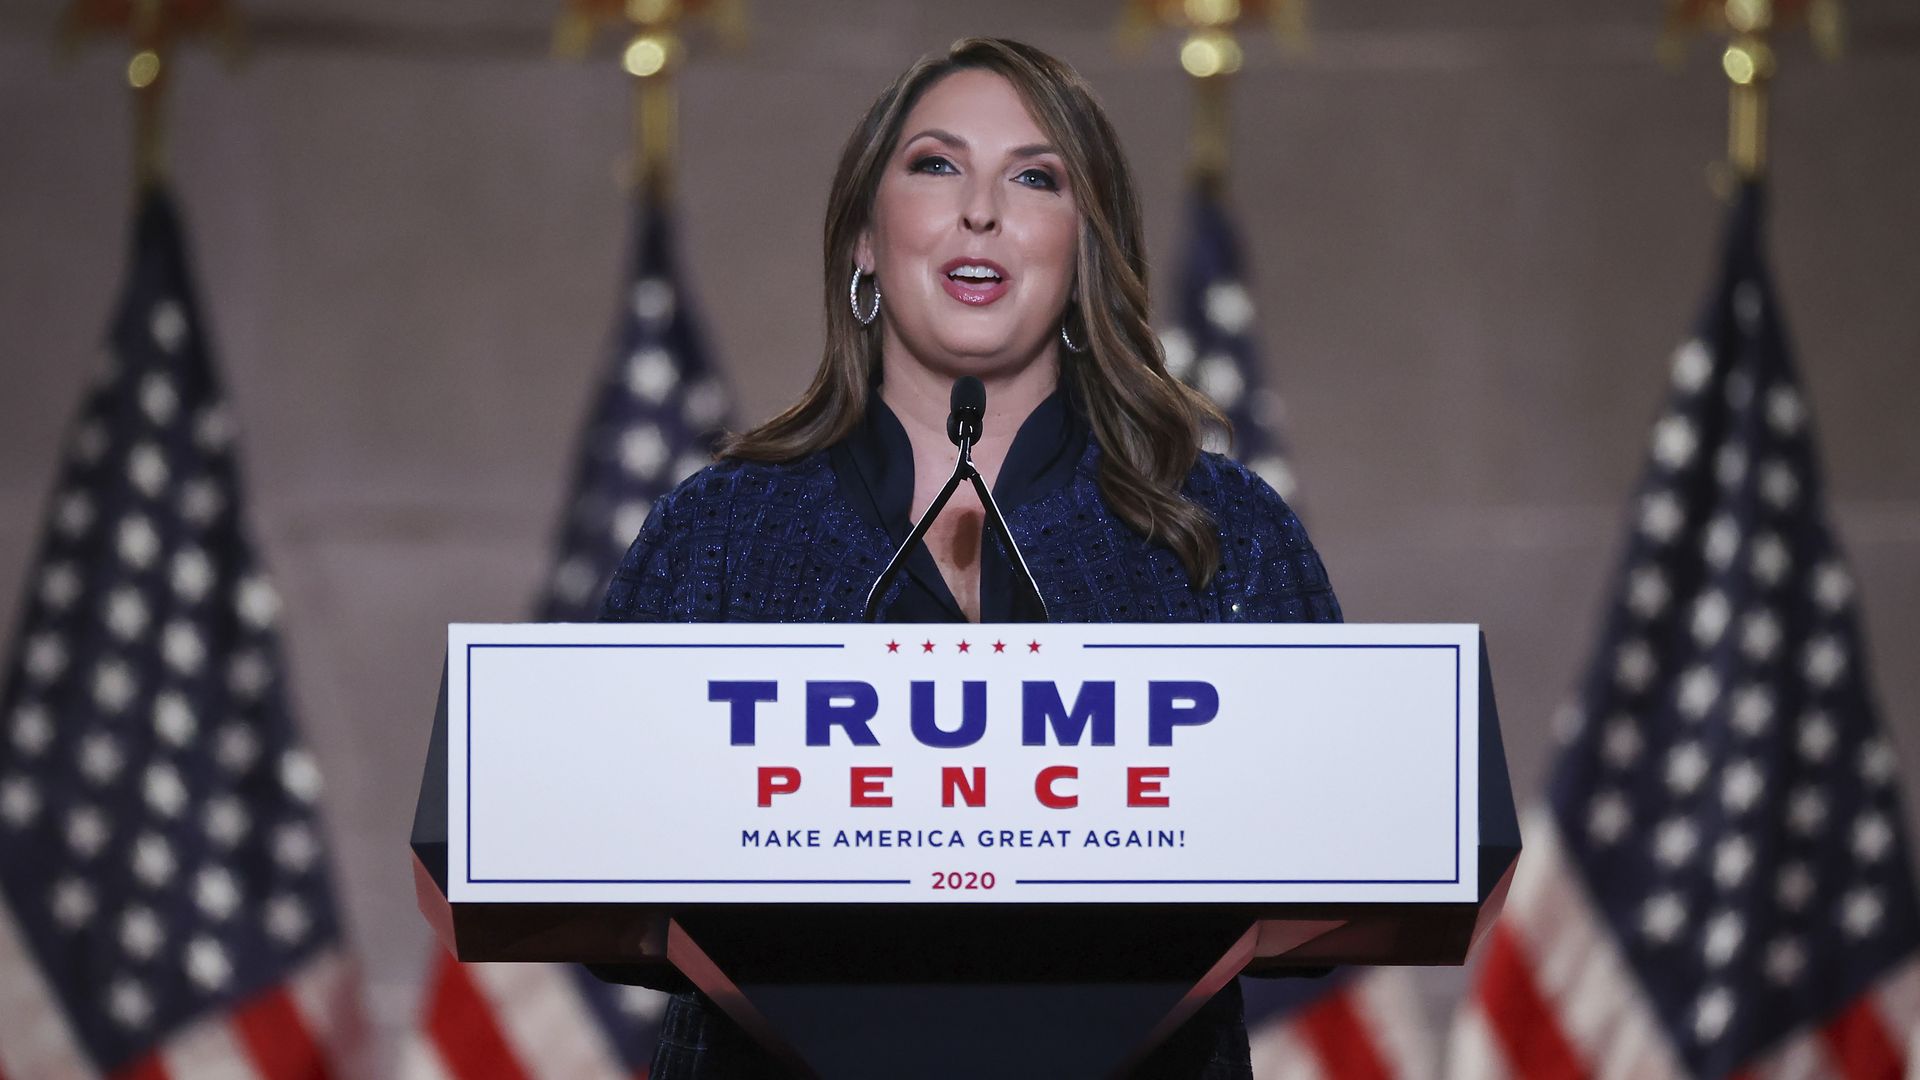 Ronna McDaniel, chairwoman of the Republican National Committee, speaks during the Republican National Convention at the Andrew W. Mellon Auditorium in Washington, D.C., U.S., on Monday, Aug, 24